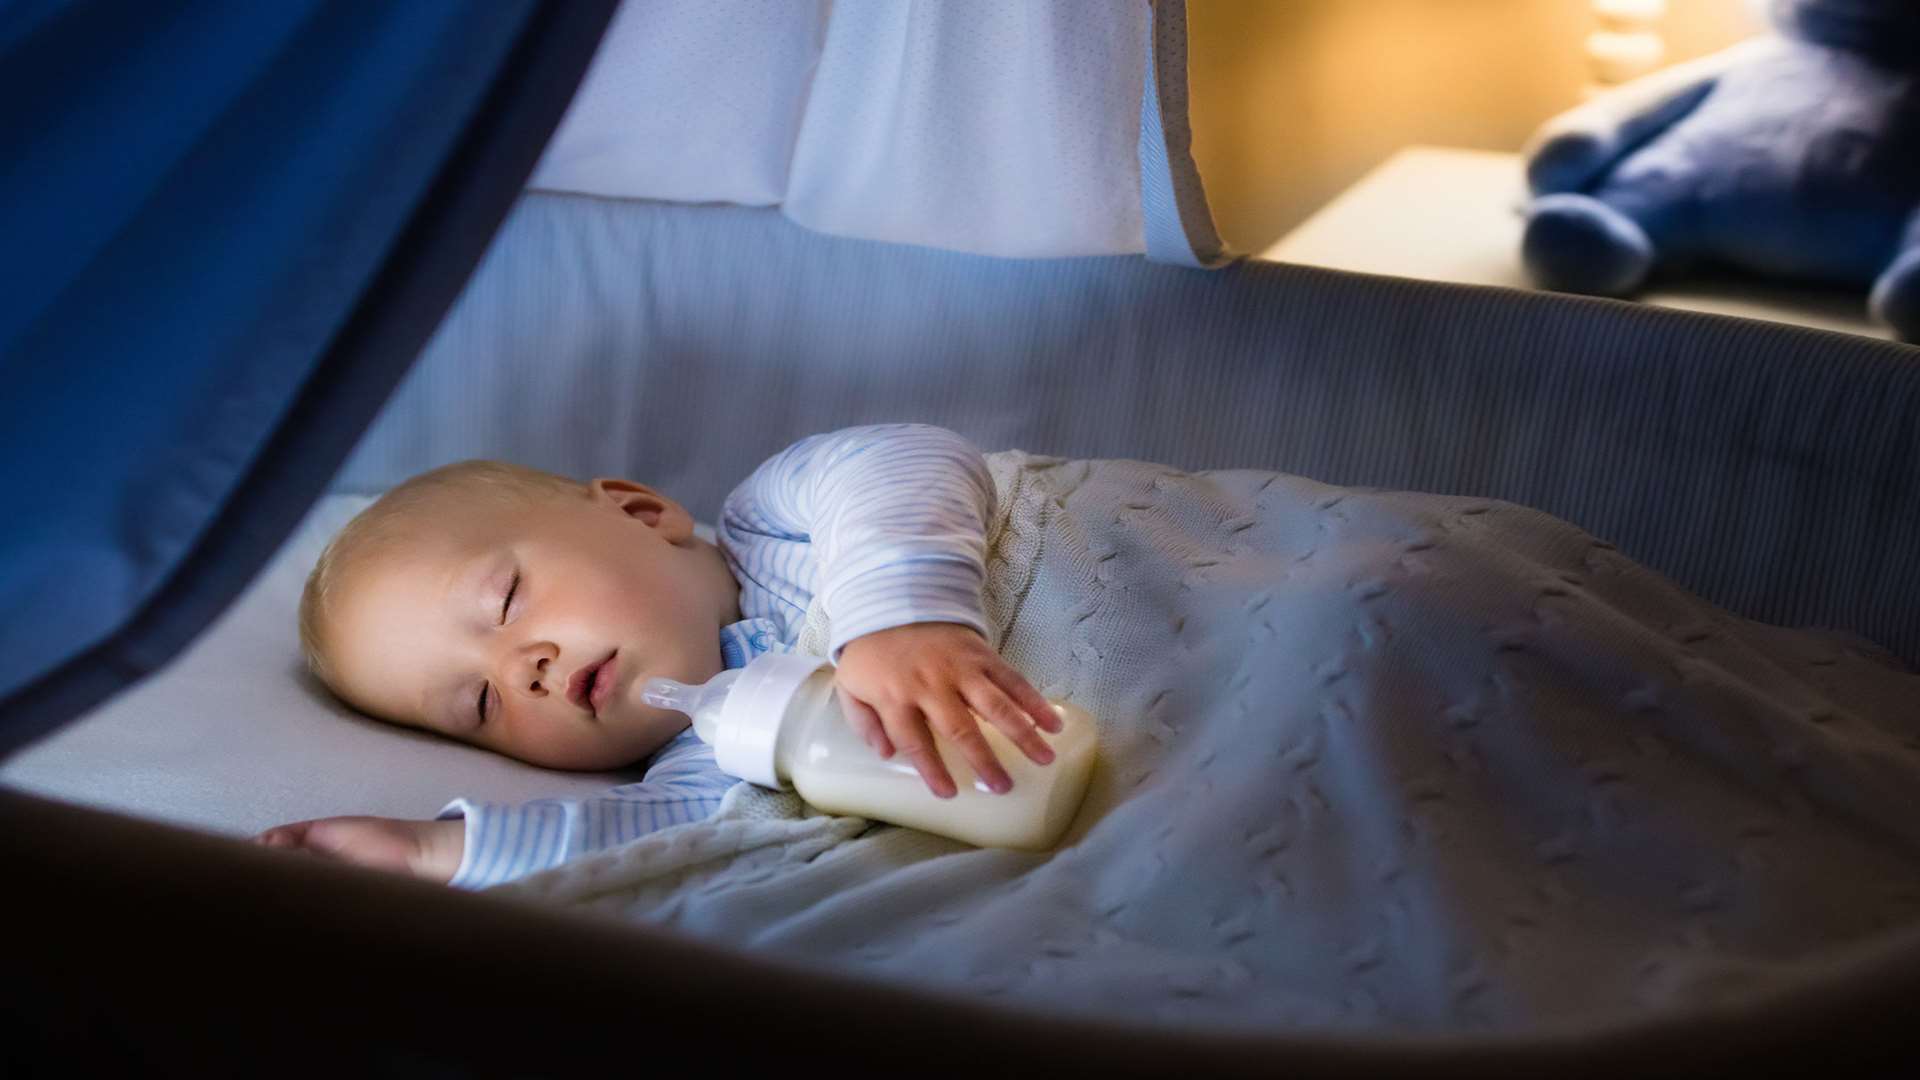 Ideally, parents should follow a bedtime ritual consistently every night